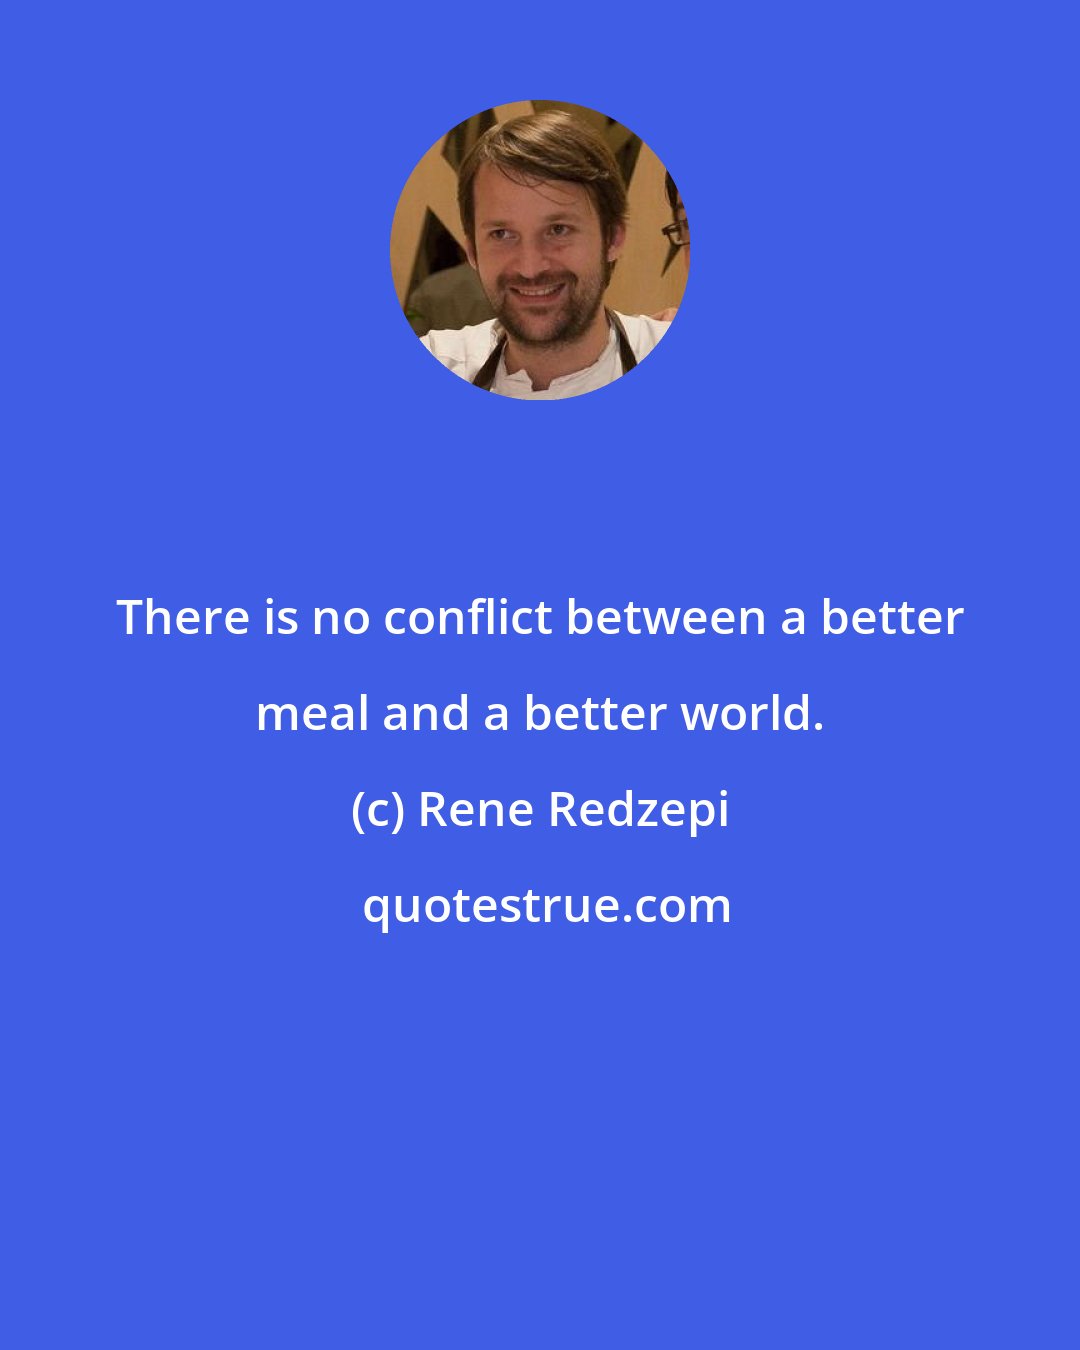 Rene Redzepi: There is no conflict between a better meal and a better world.